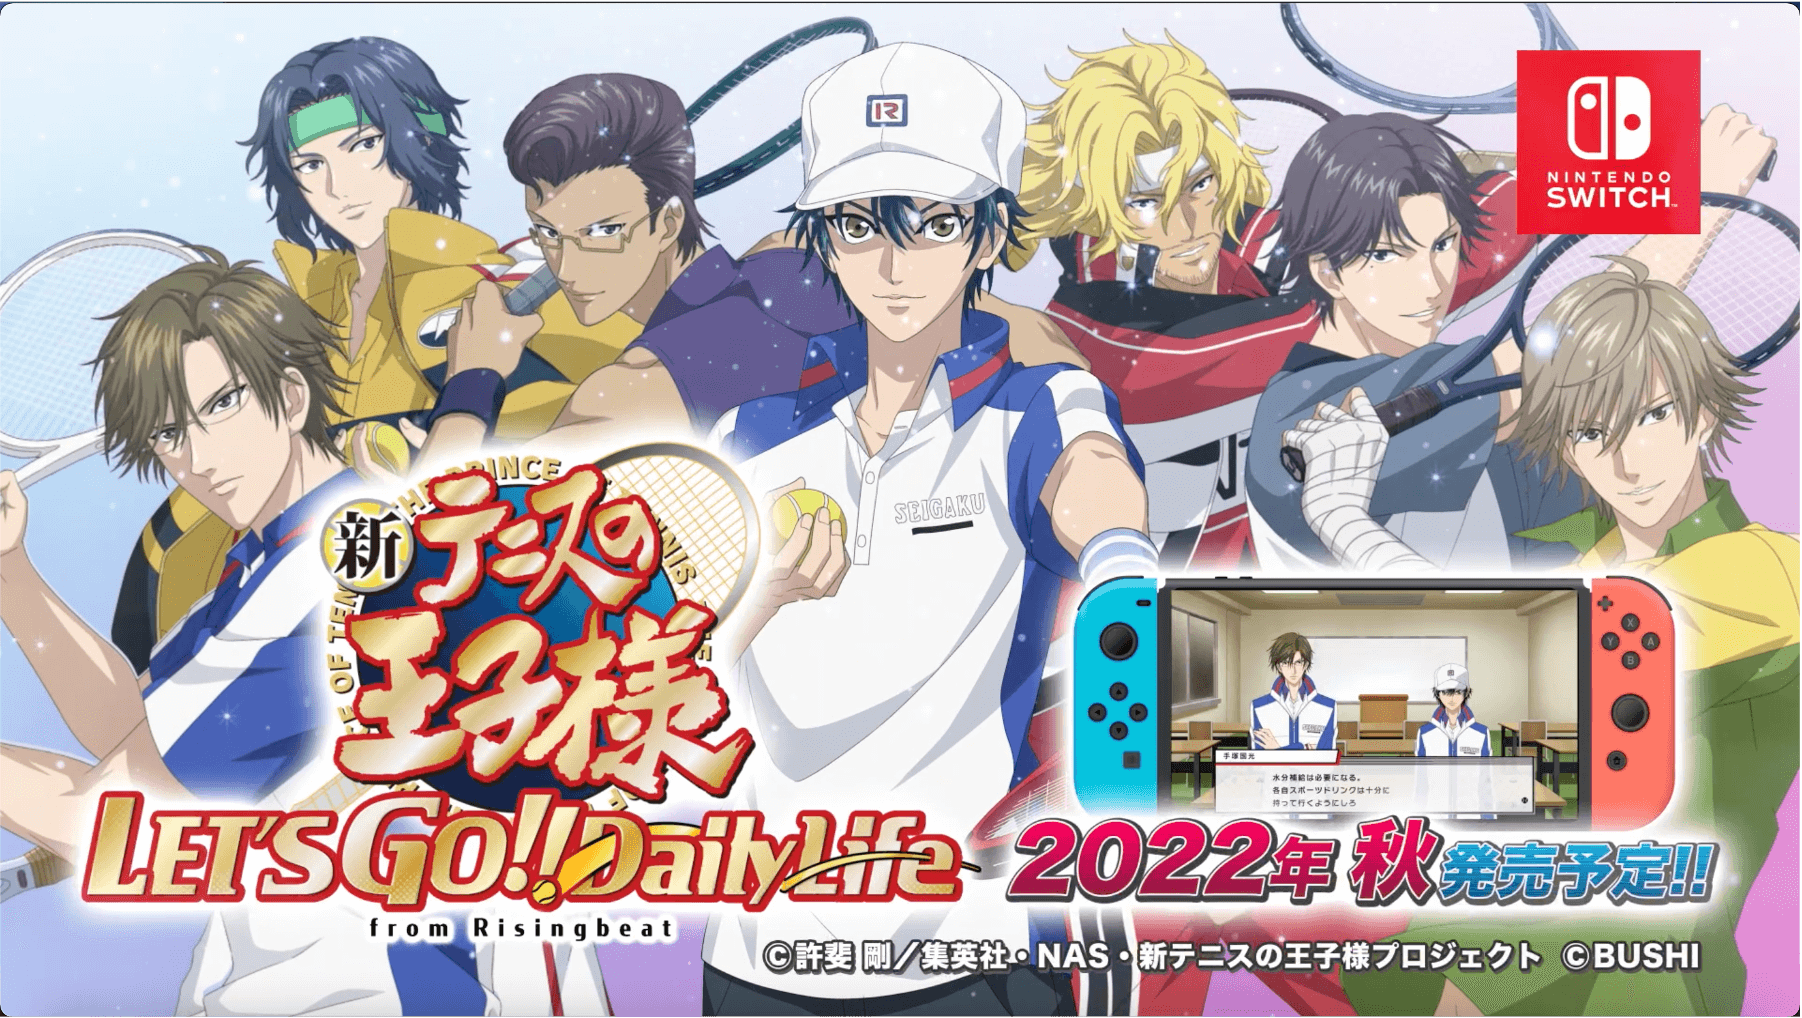 New Prince of Tennis Game Coming to Nintendo Switch in 2022